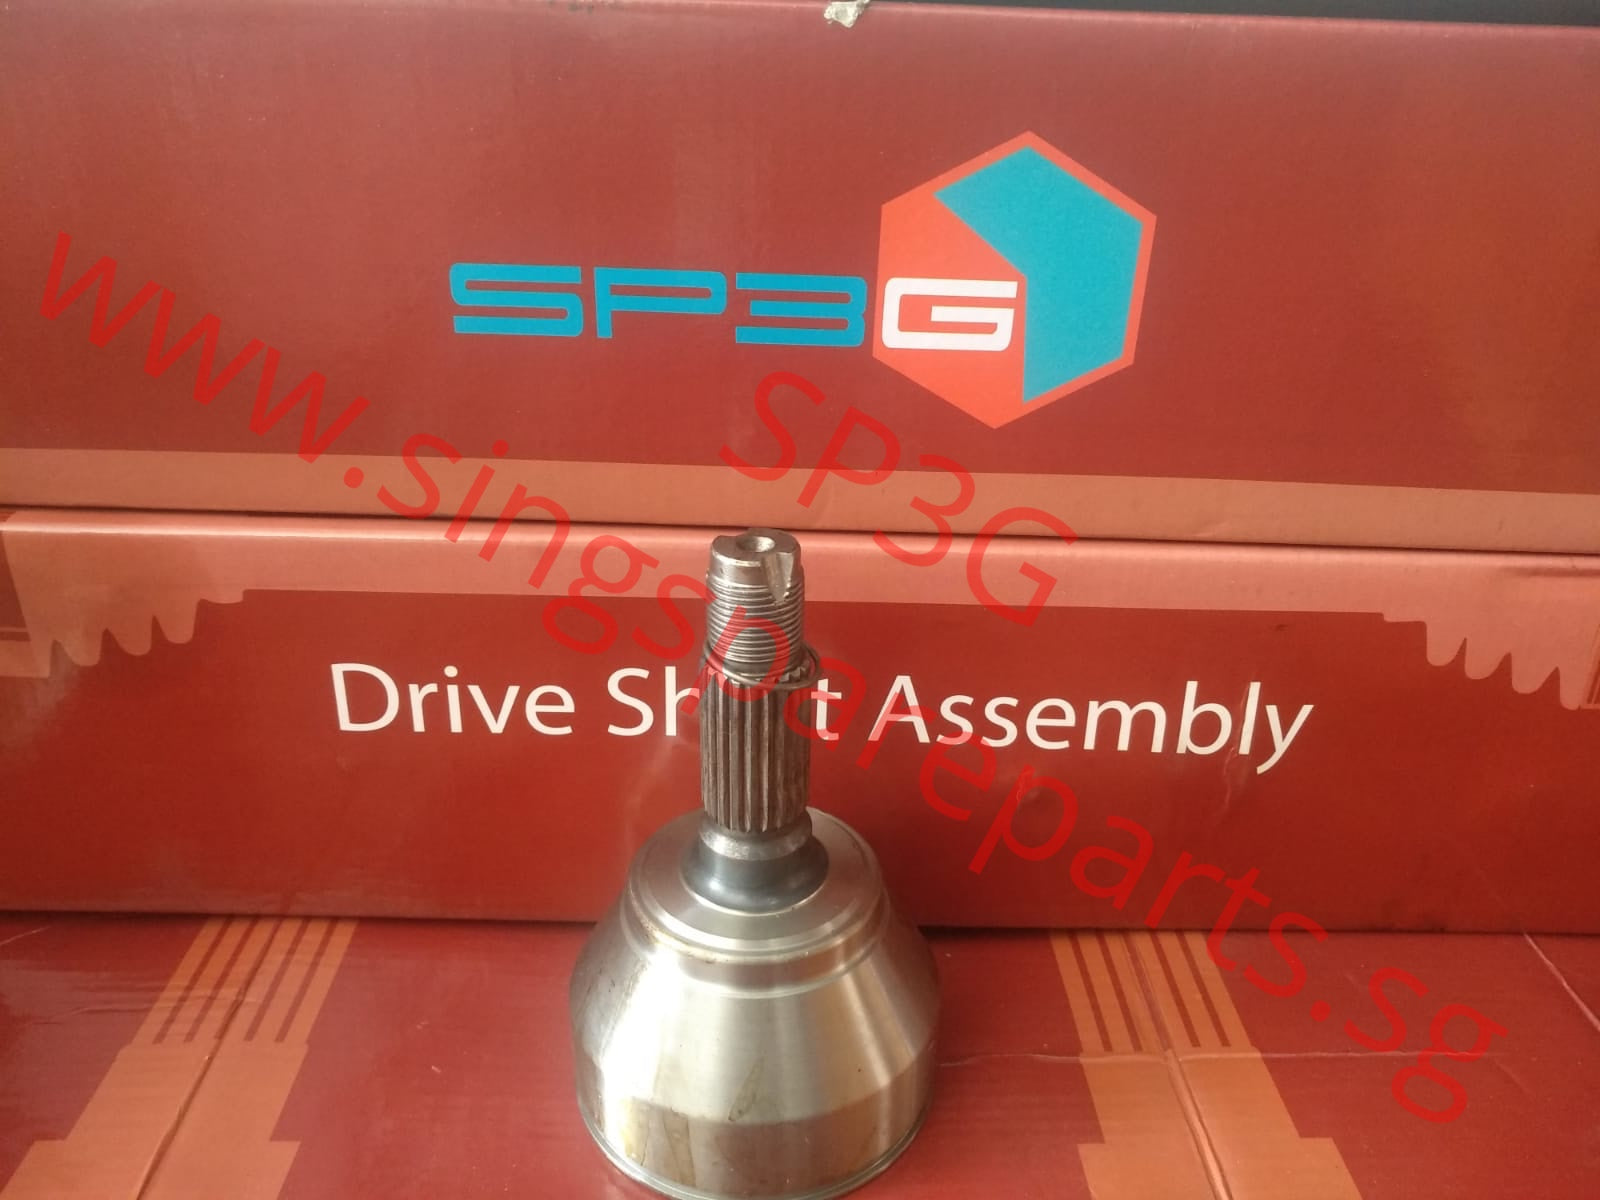 Peugeot 207 CV Joint (Constant Velocity Joint) A=21 F=22 O=48